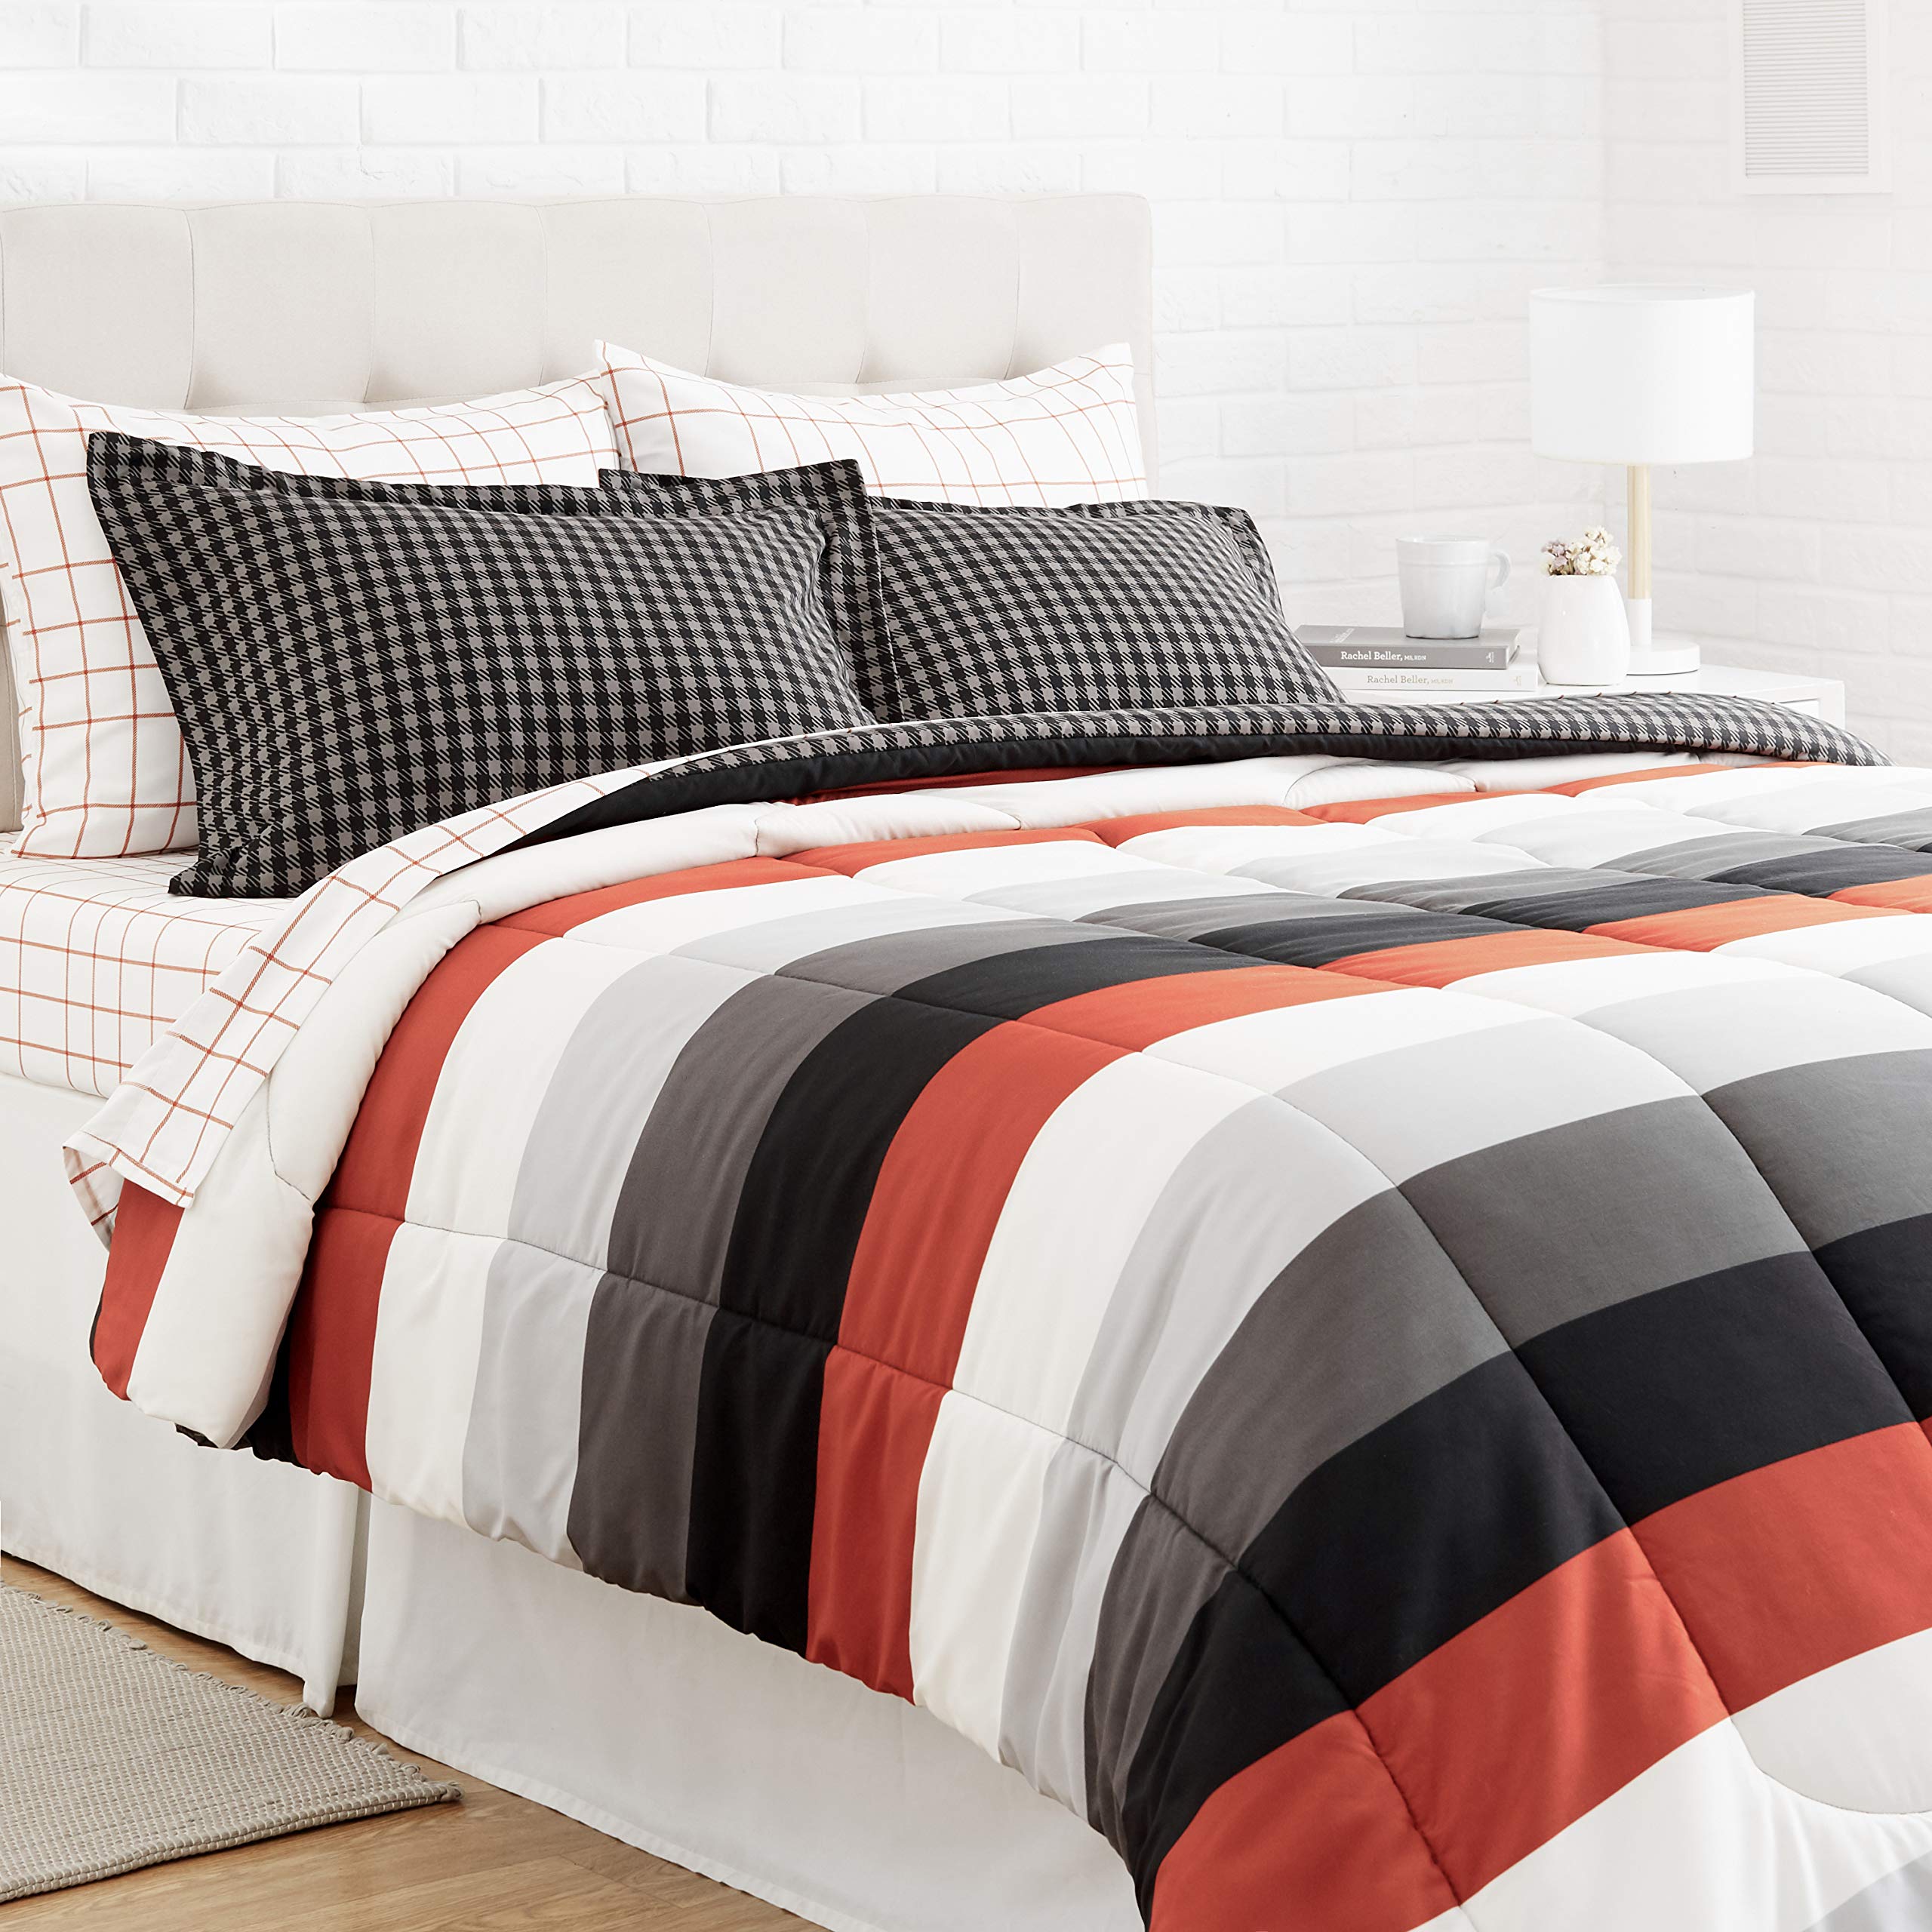 Book Cover Amazon Basics Lightweight Microfiber 7 Piece Bed-In-A-Bag Comforter Bedding Set, Full/Queen, Red Simple Stripe, Plaid, Striped Red Simple Stripe Queen